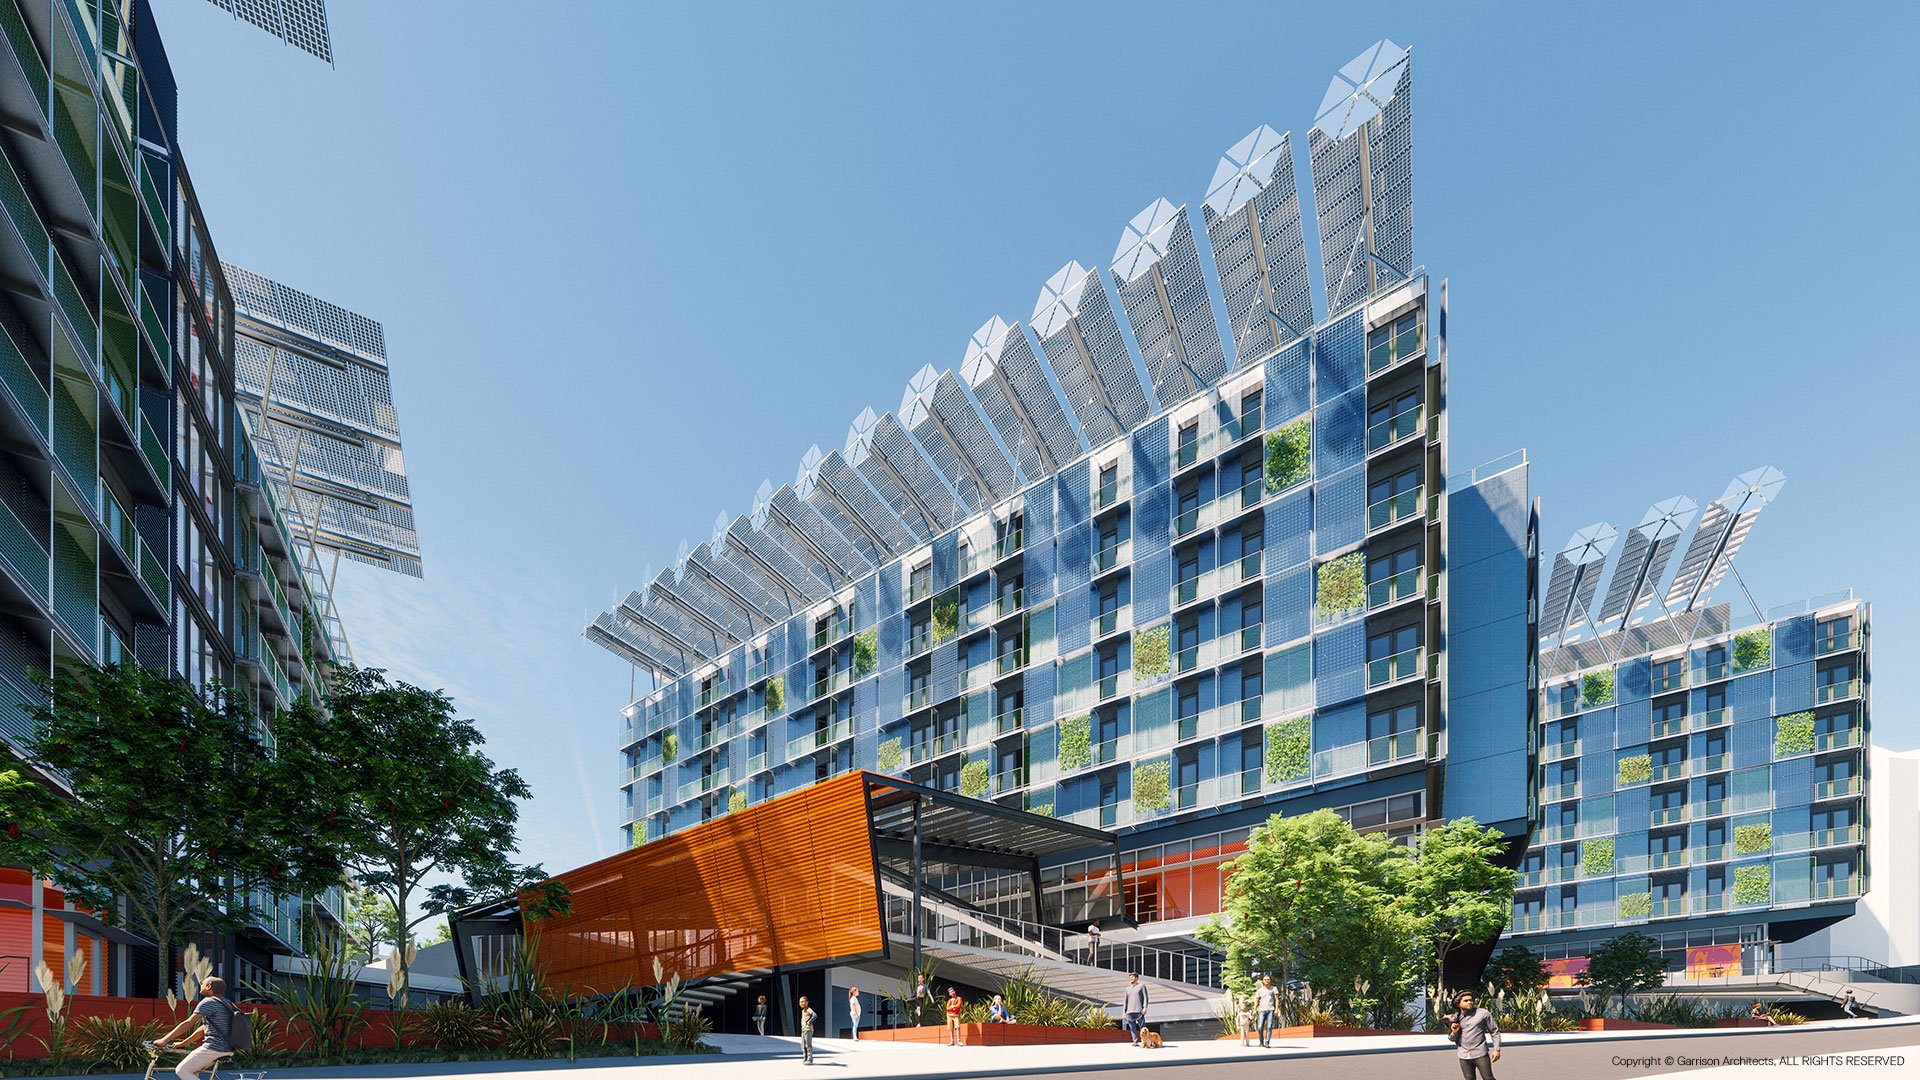 The Seventy Six Apartments - Mixed-Use Residential Building